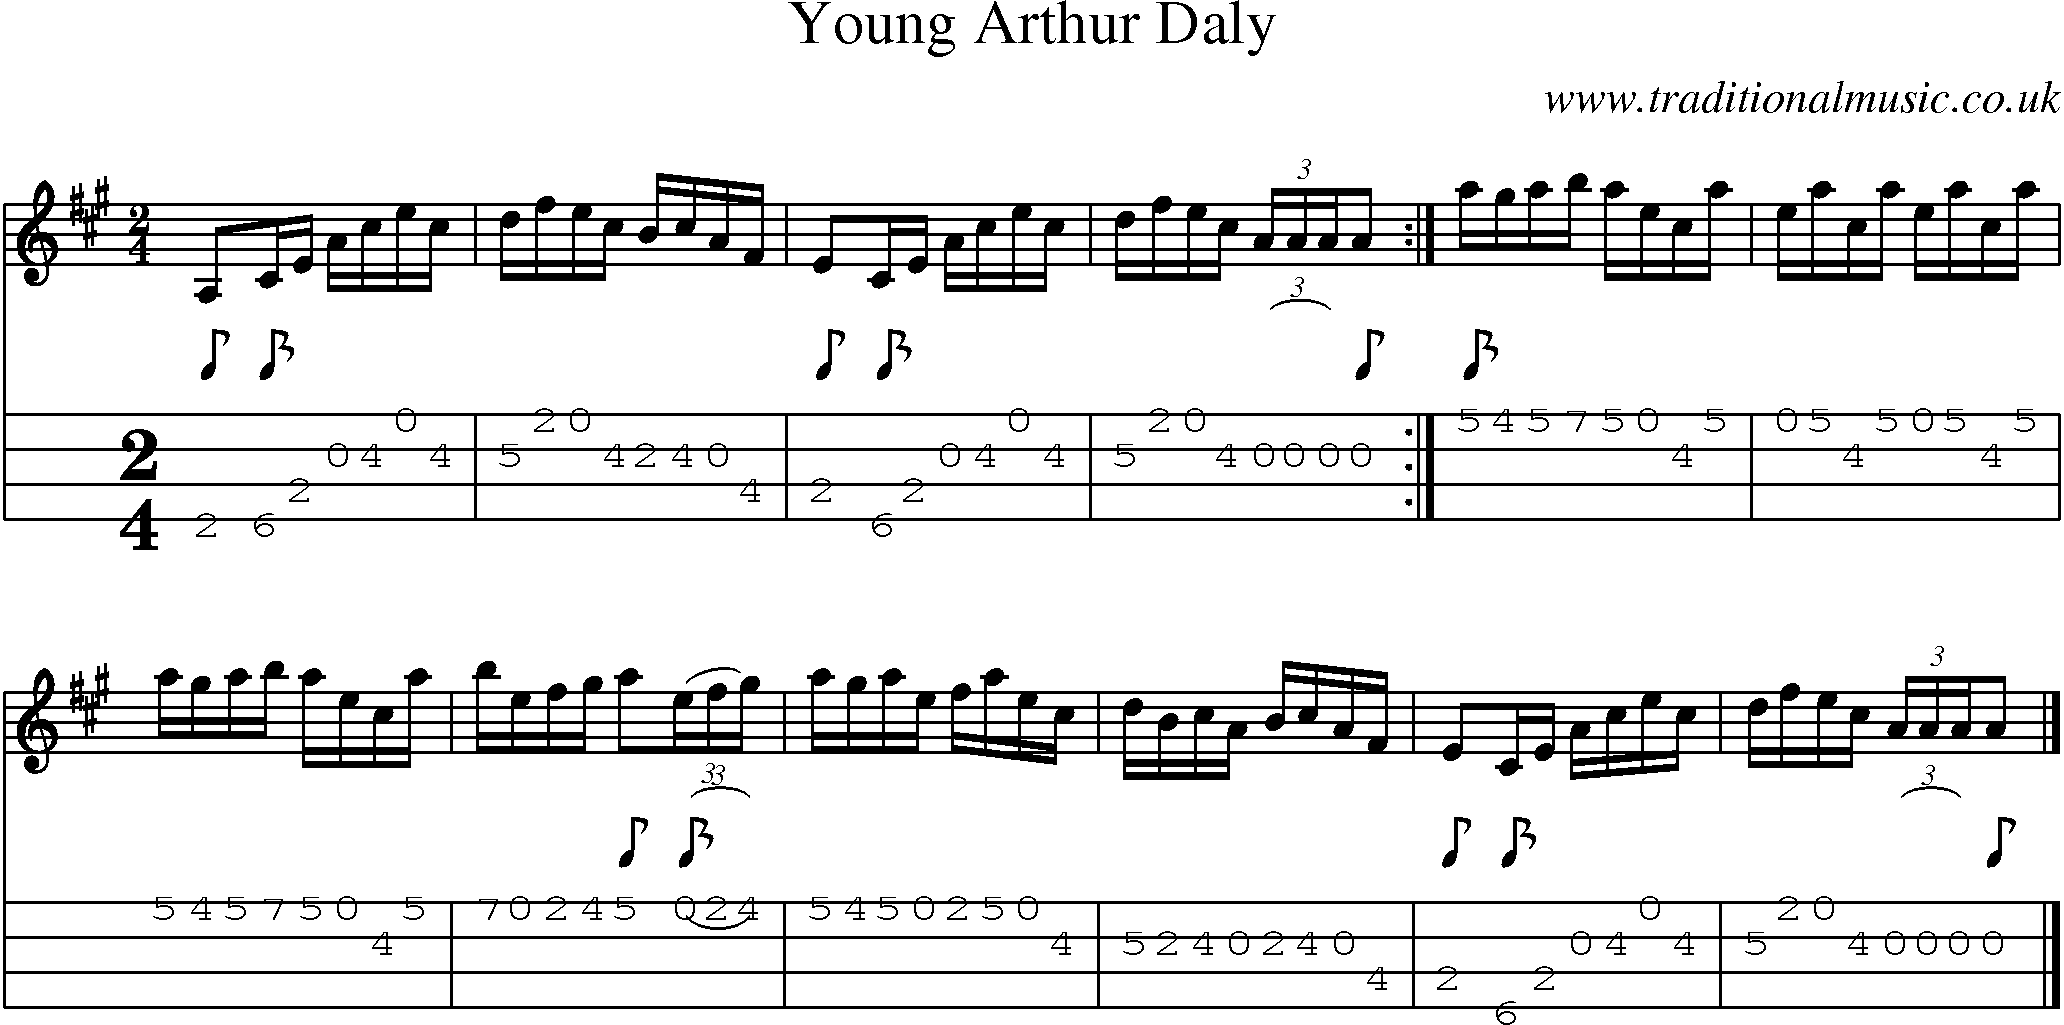 Music Score and Mandolin Tabs for Young Arthur Daly